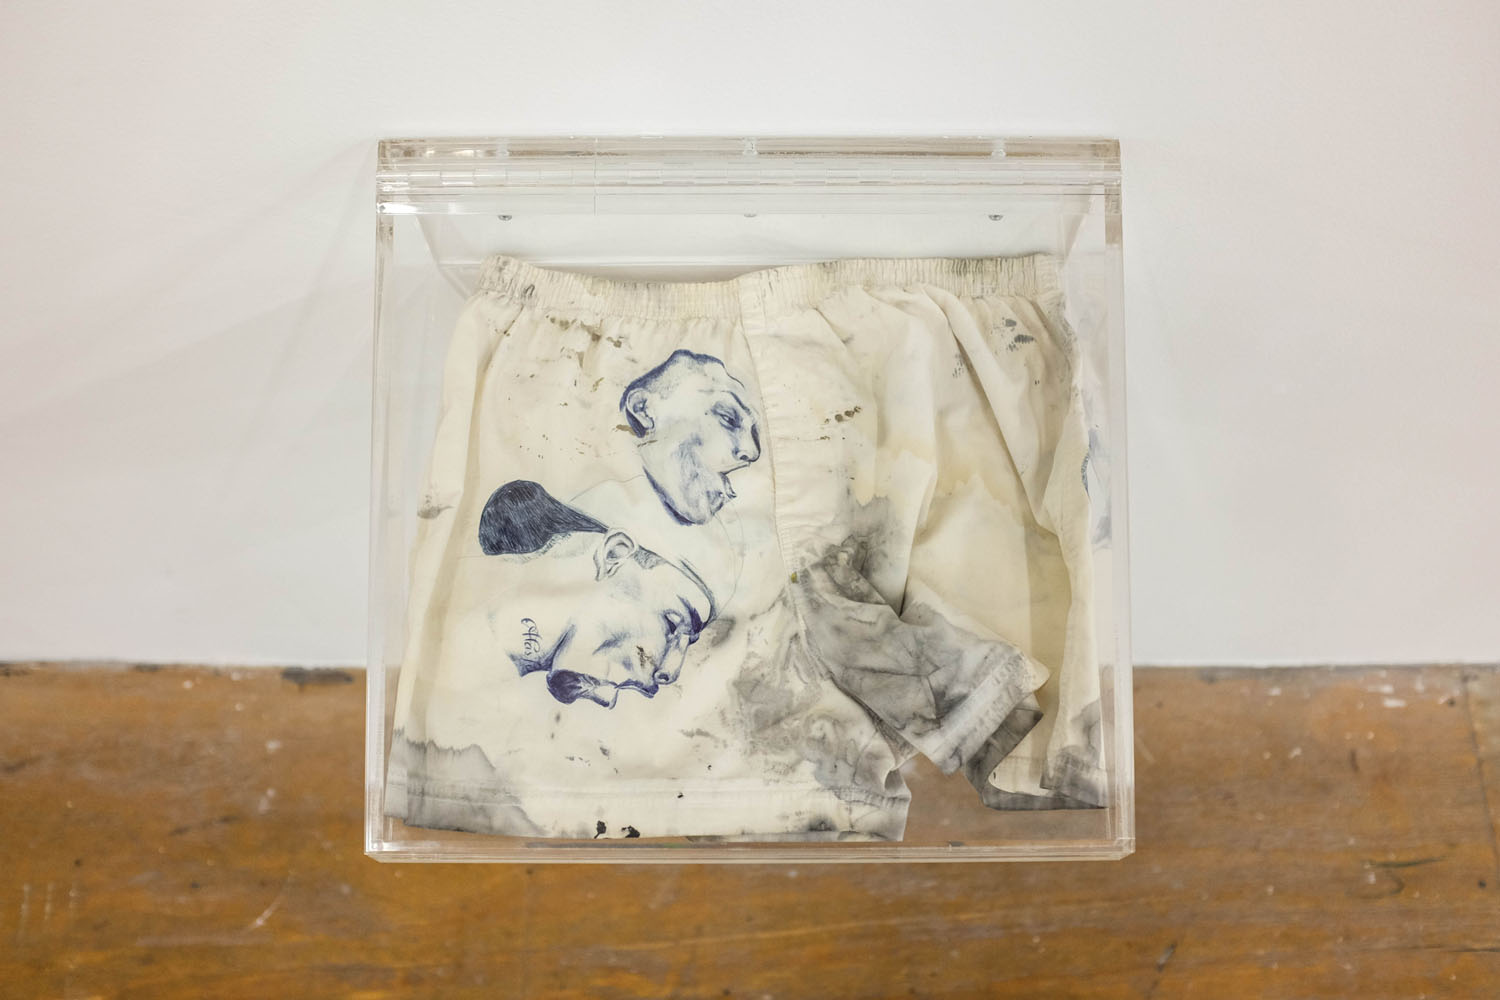 Rafa Esparza, *paños puñales. you can see it in their faces. uno (faggot handkerchiefs... one)*, 2011. Blue ball point pen, blood, urine, saliva, black ink on white waist boxer